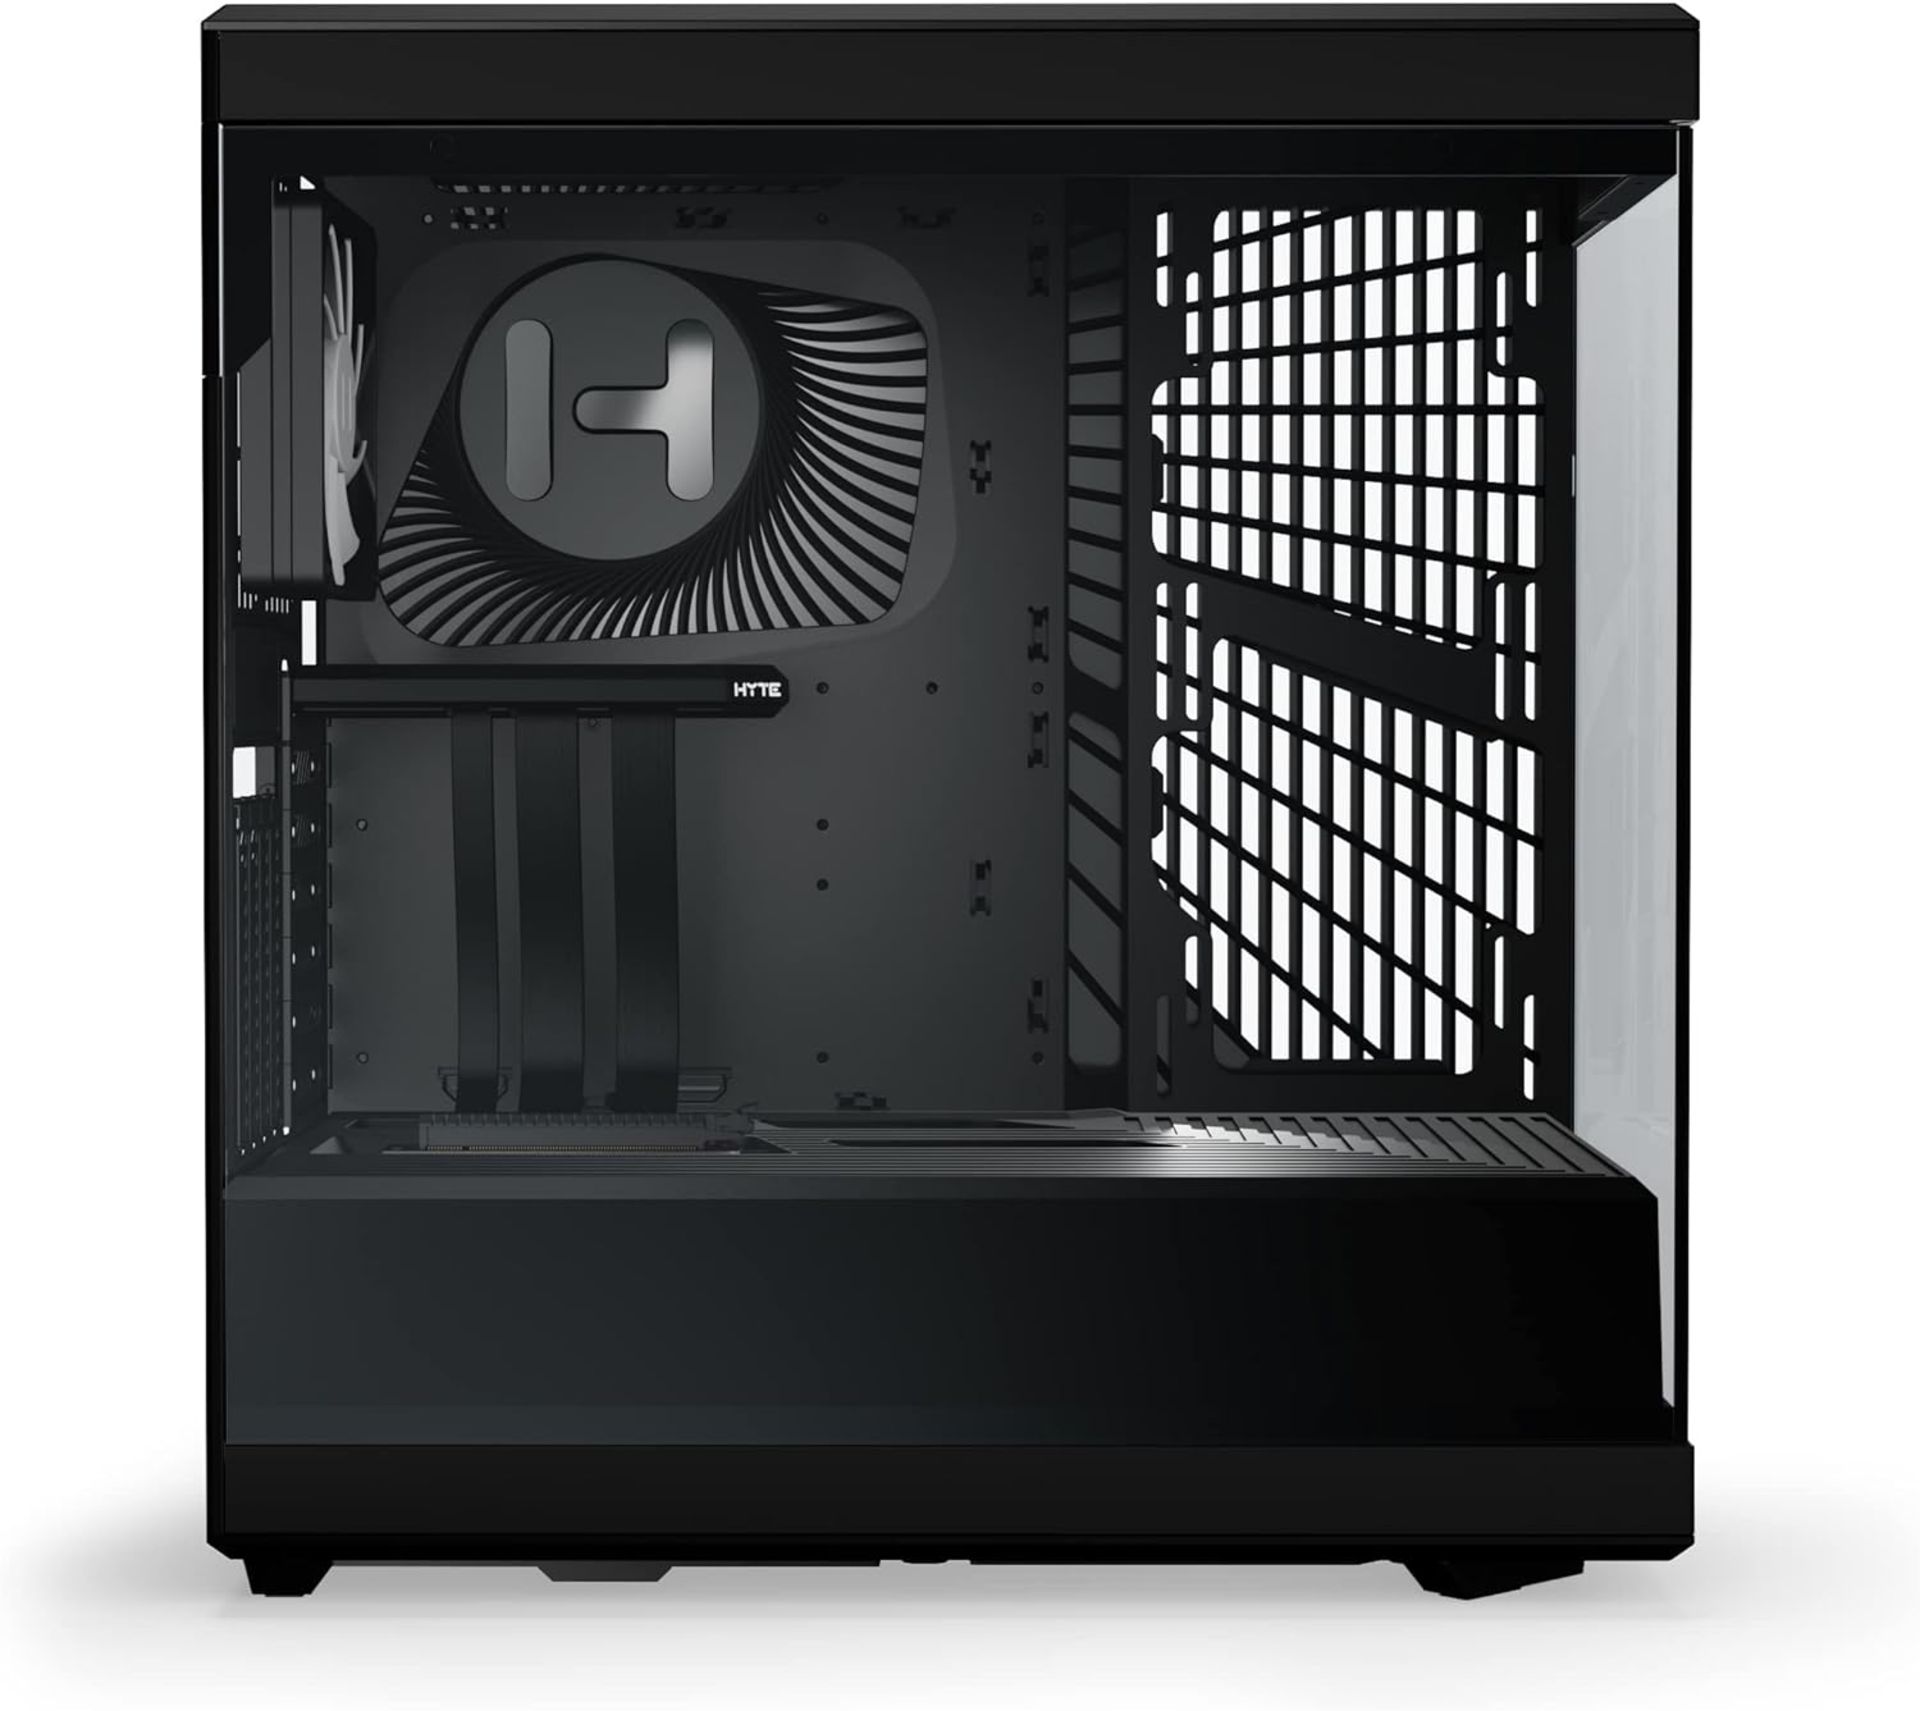 NEW & BOXED HYTE Y40 Mid-Tower ATX Case - Black. RRP £159.98. (R15R). The HYTE Y40 Mid-Tower ATX - Image 5 of 6